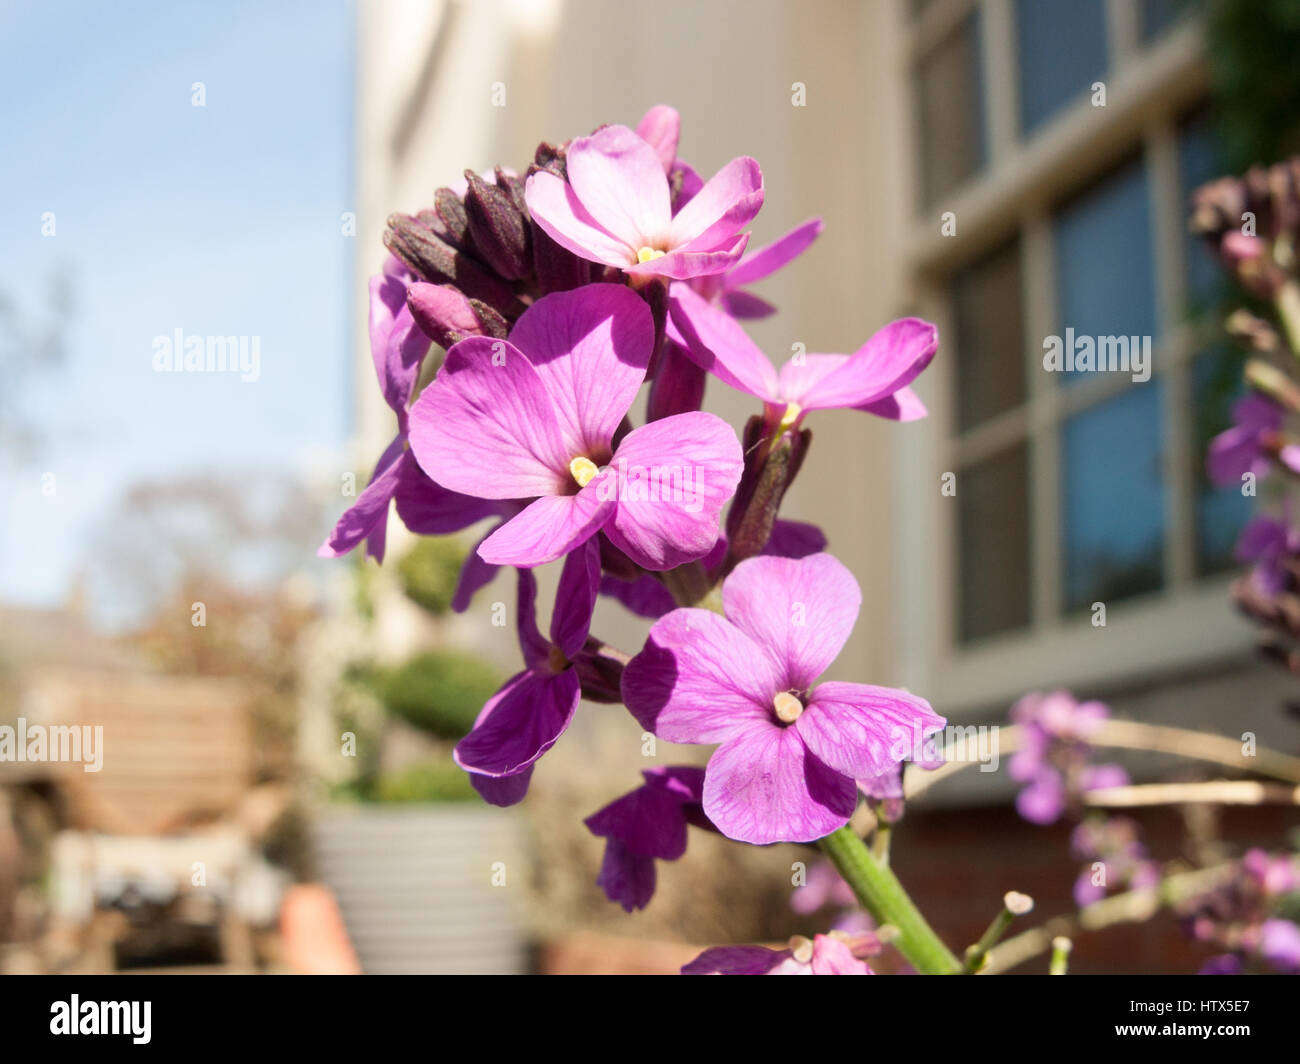 A shot of some purple flowers up close. Stock Photo